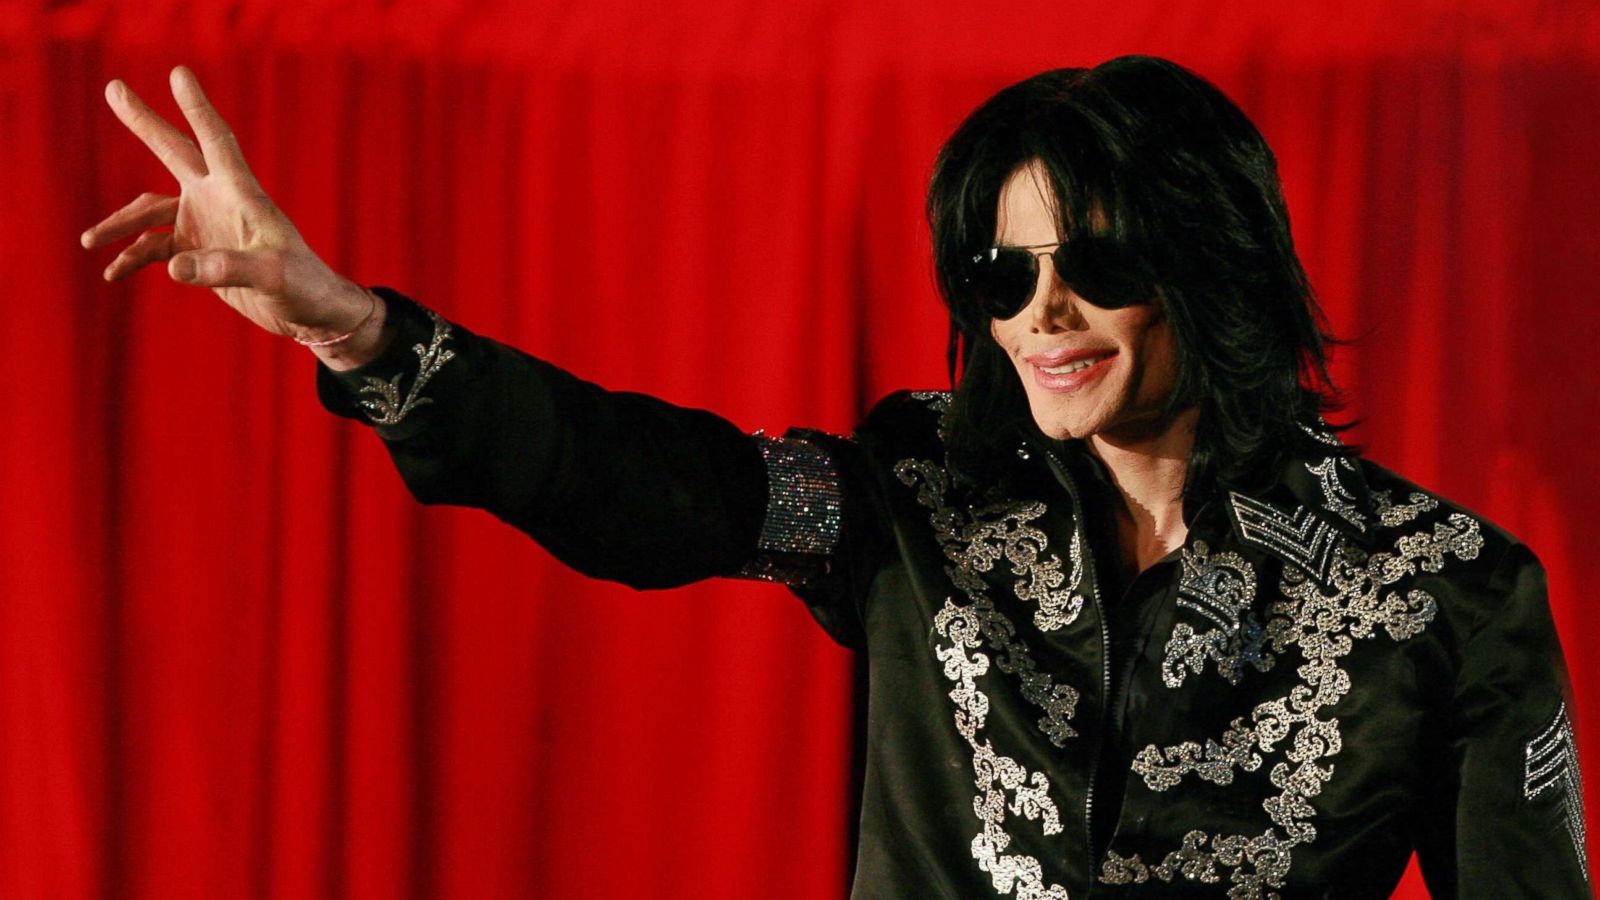 What's Come Out About Michael Jackson Since He Died